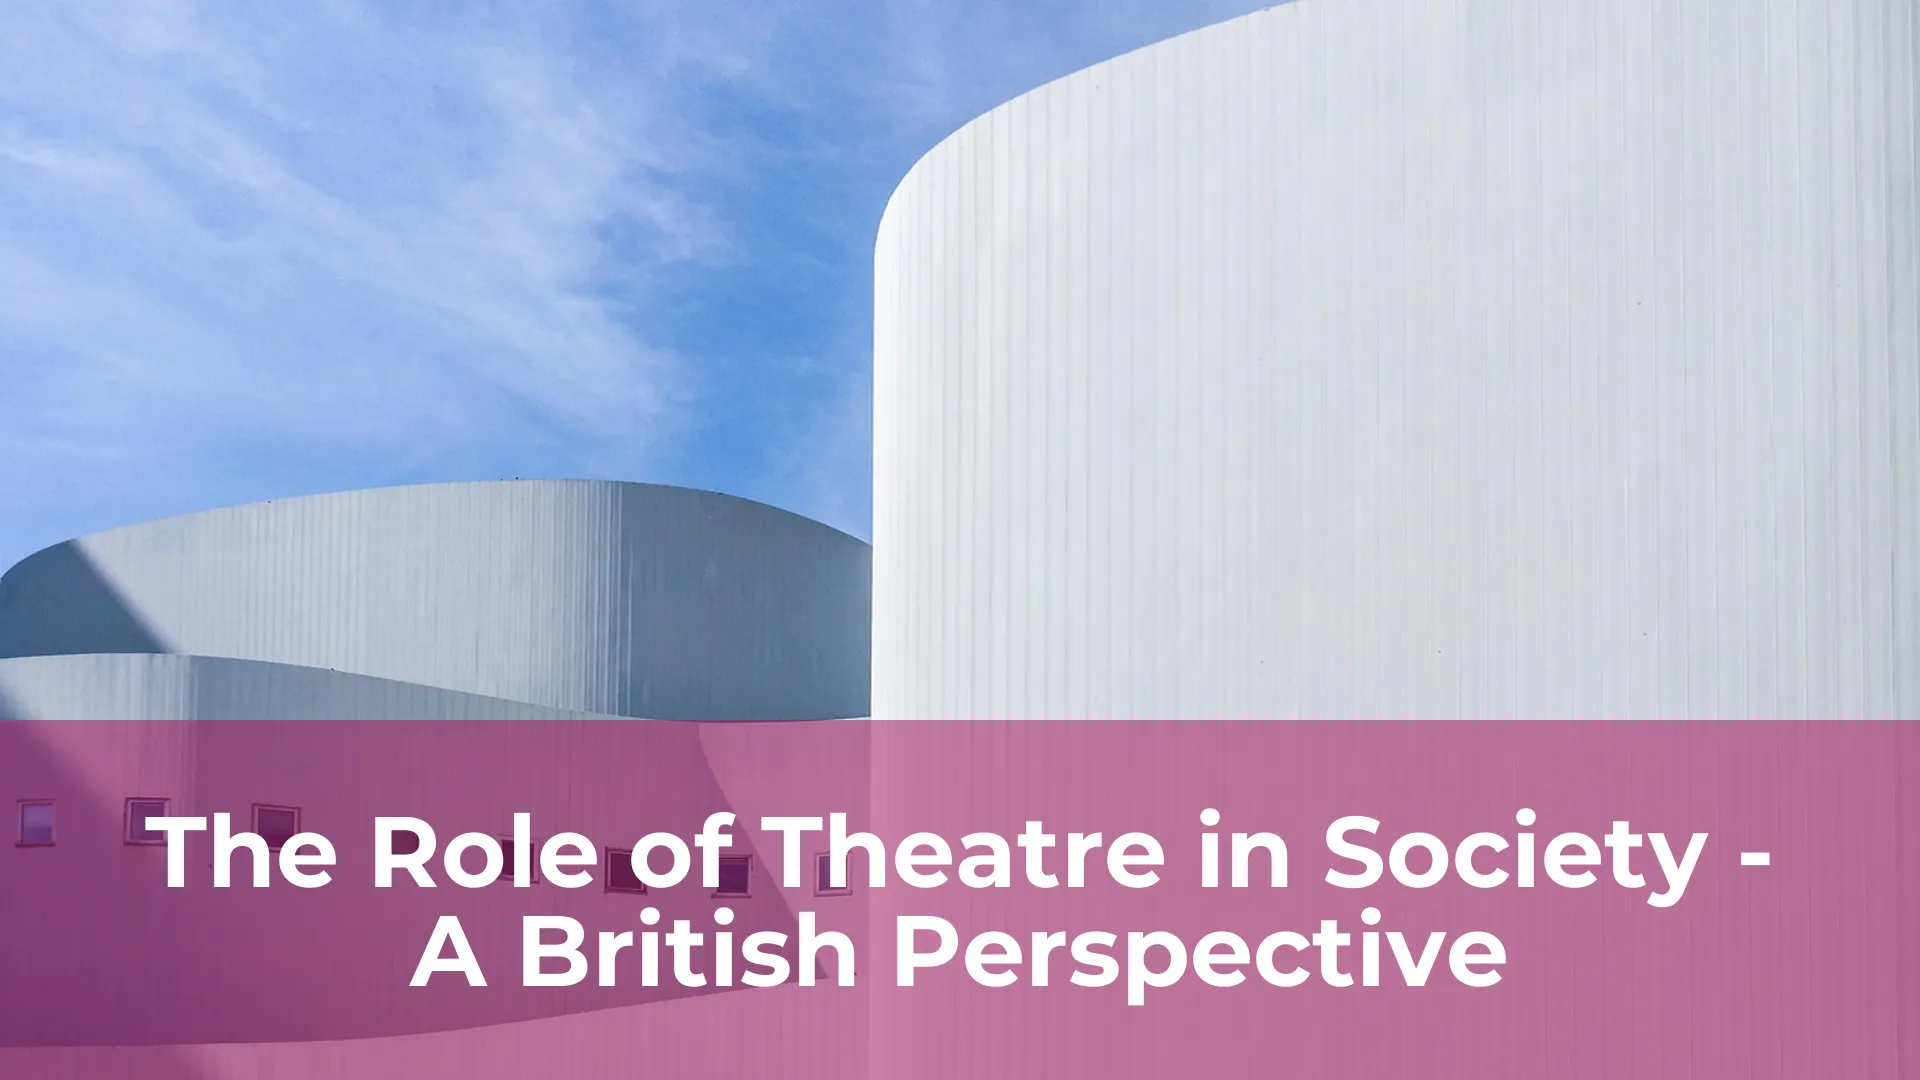 The role of theatre in society a british perspective